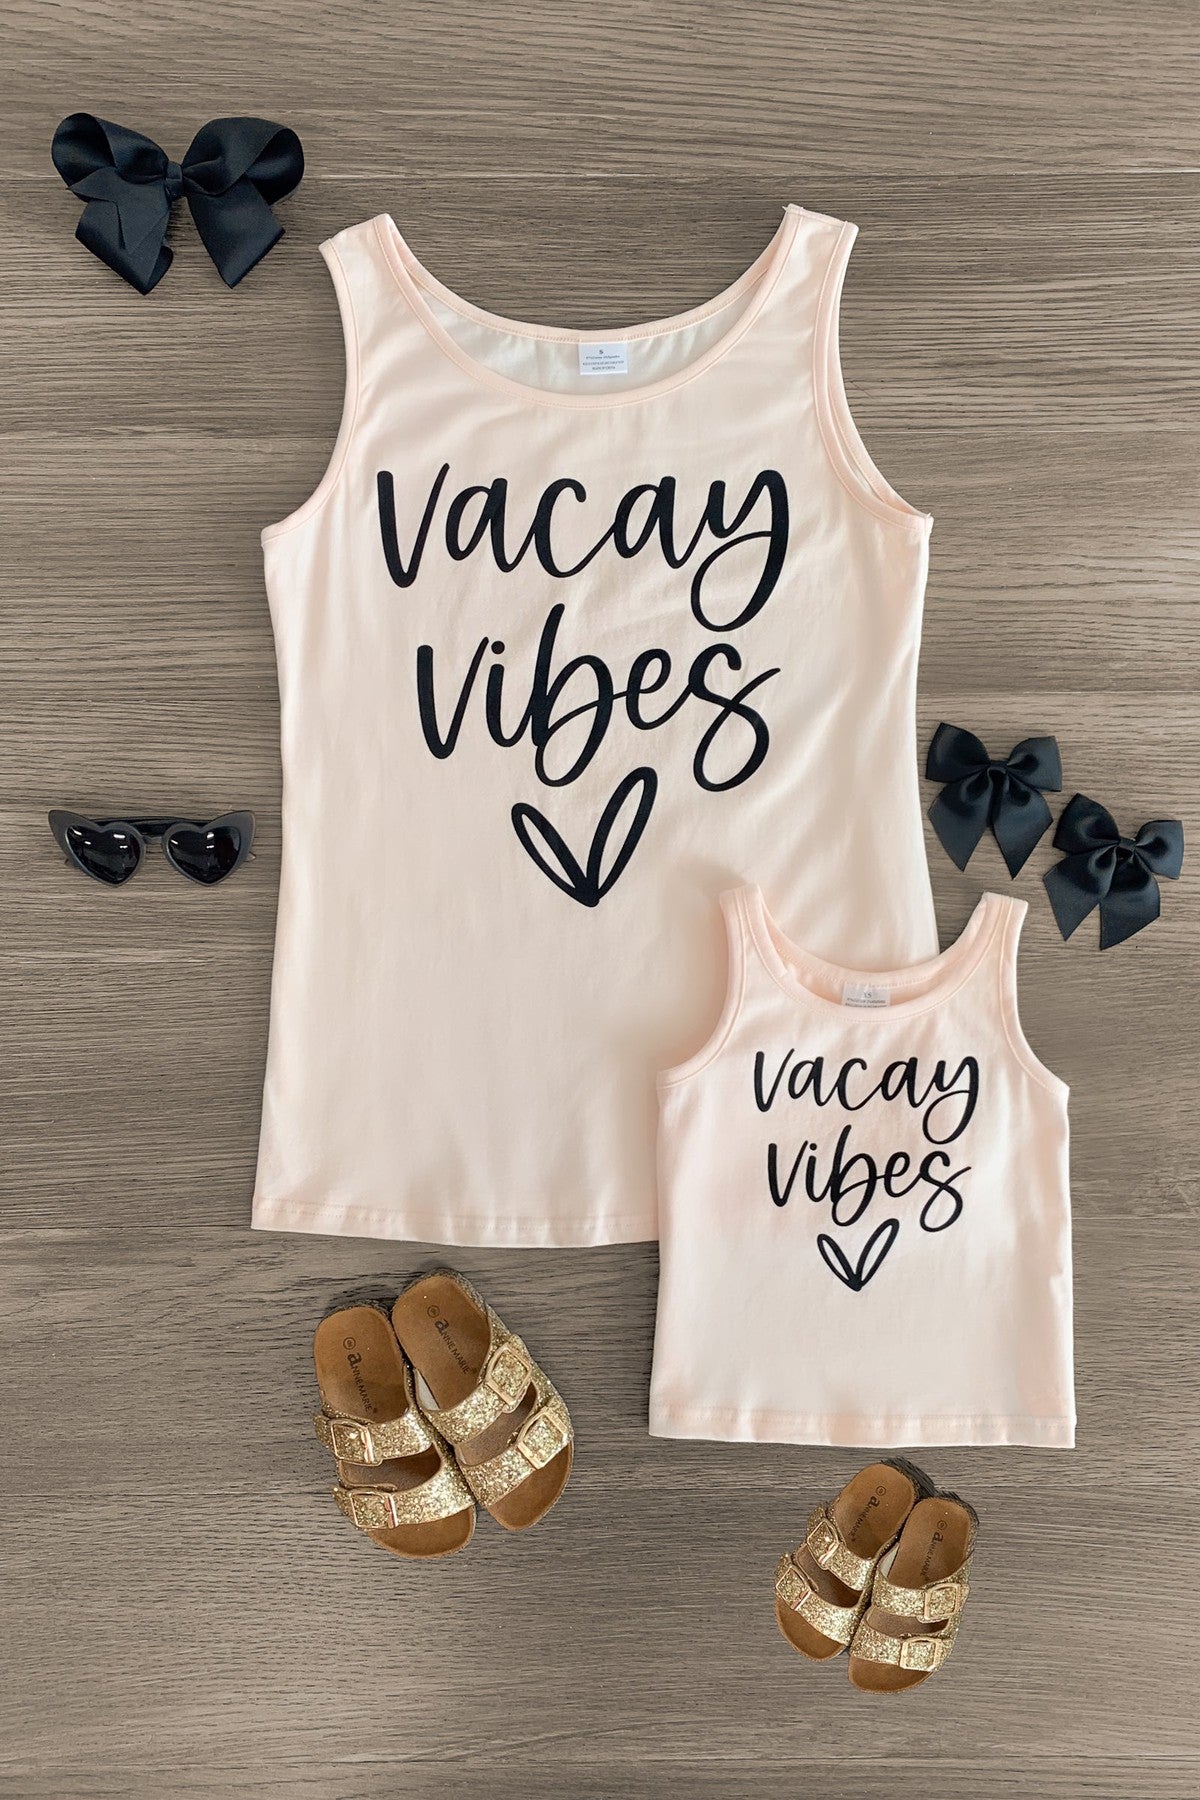 Mom & Me - "Vacay Vibes" Tank Top - Sparkle in Pink